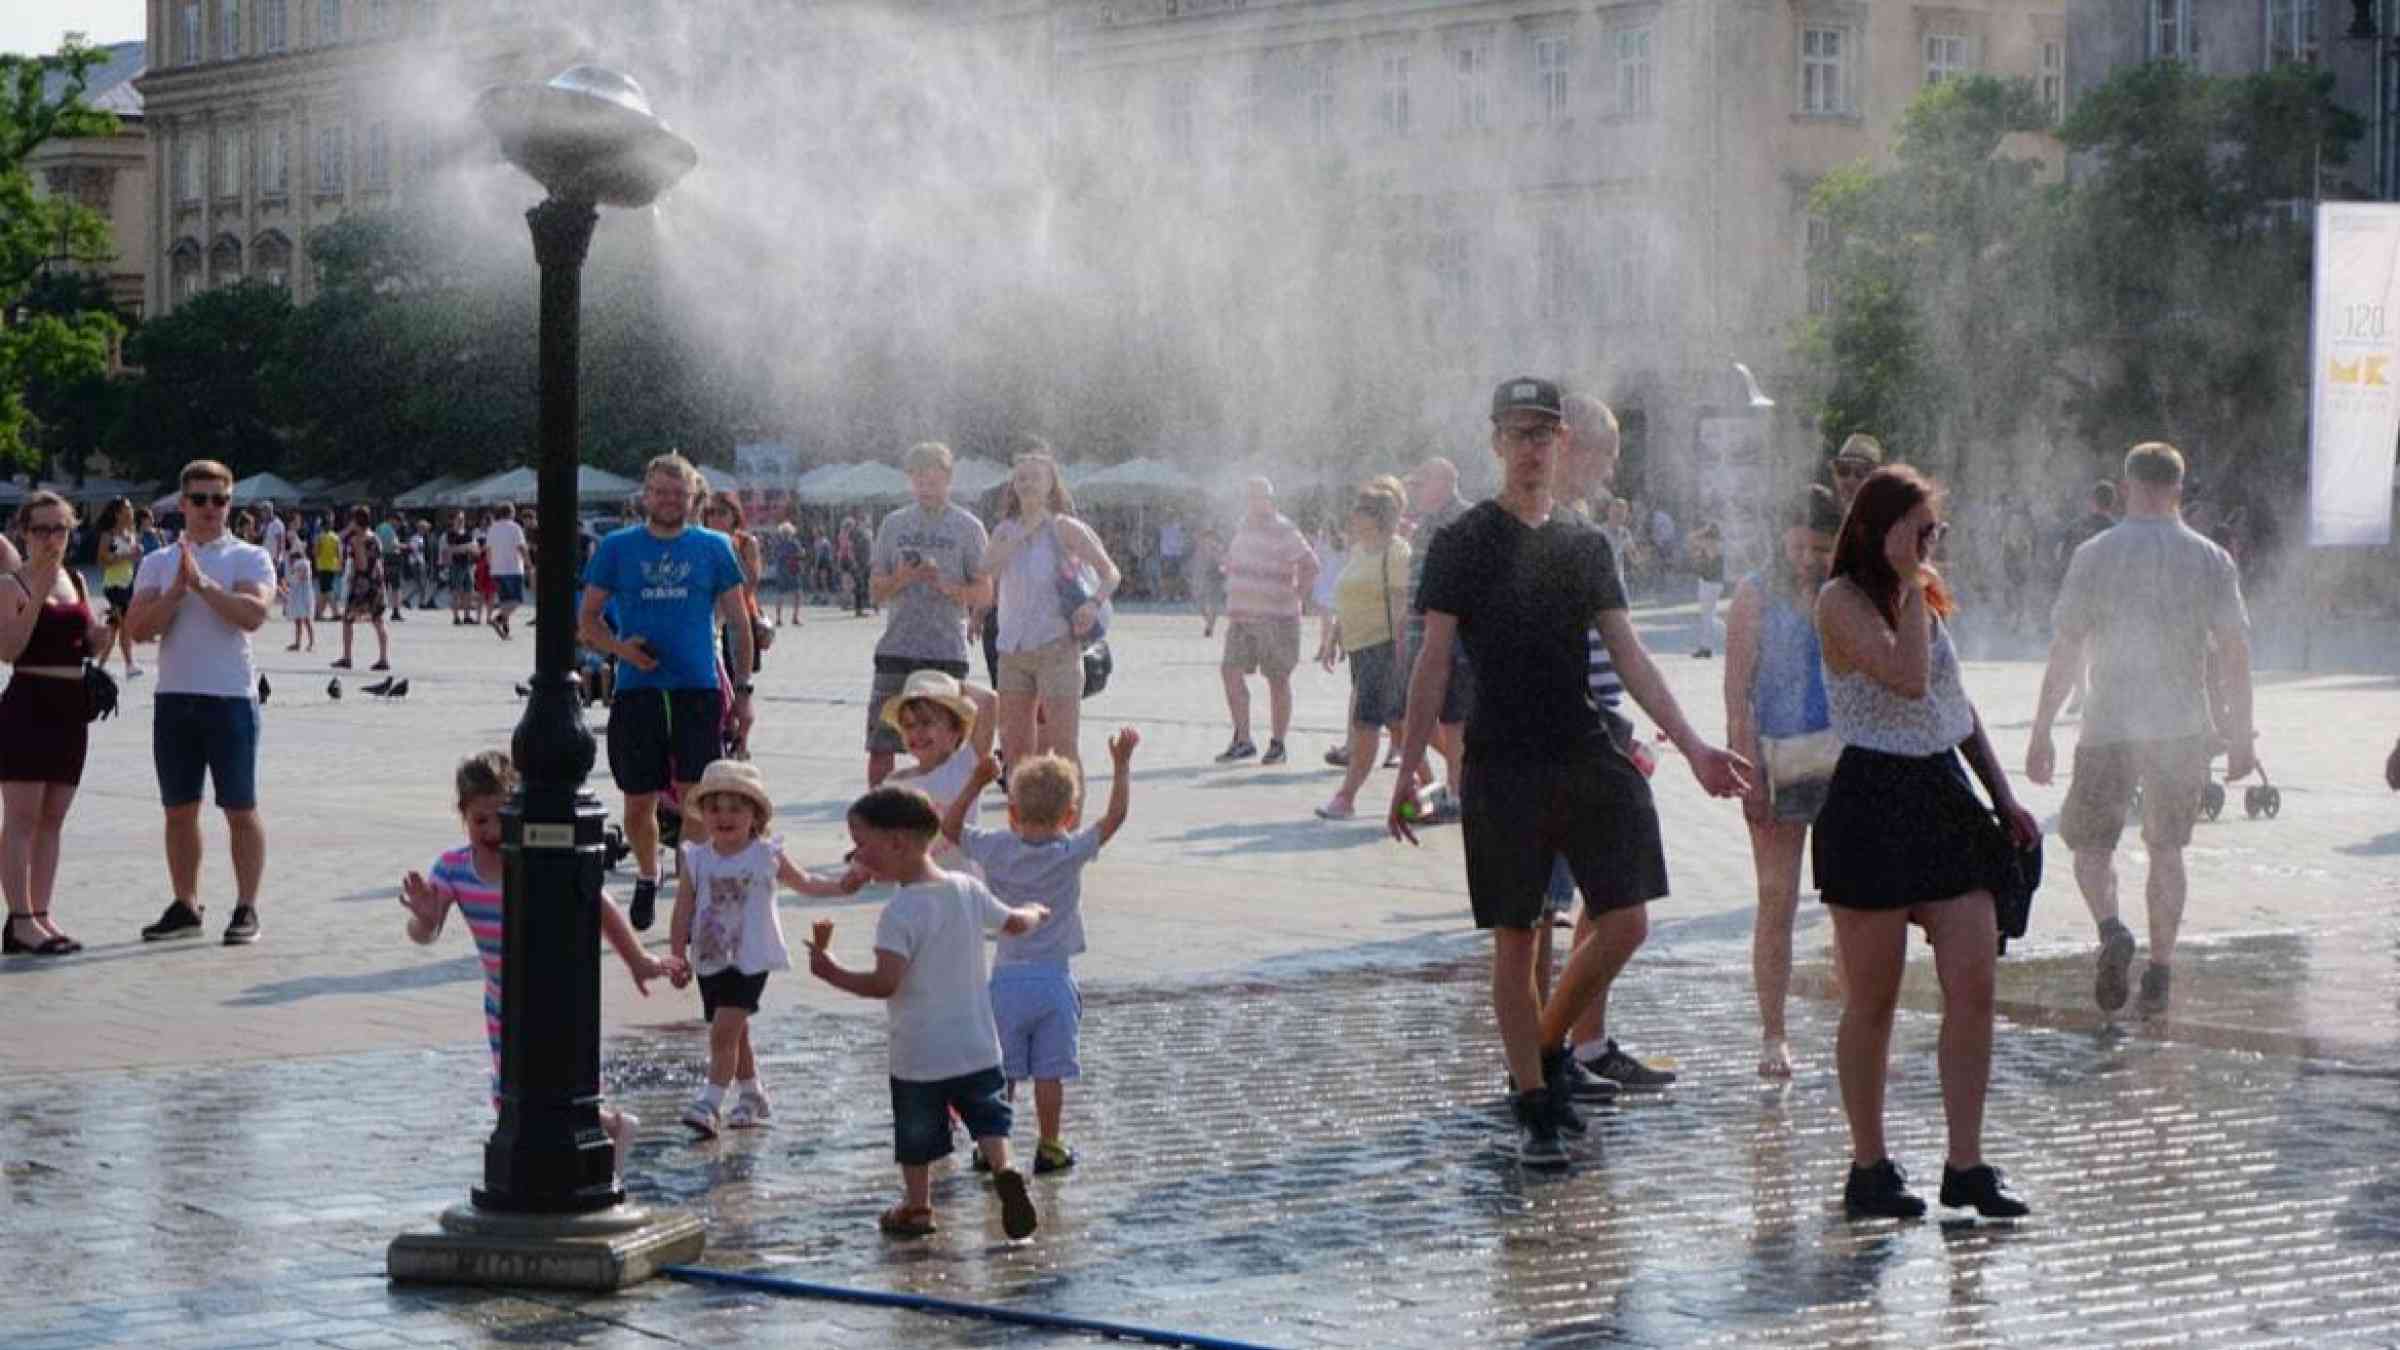 Crowds pass by a fountain during a hot day in Krakow, Poland